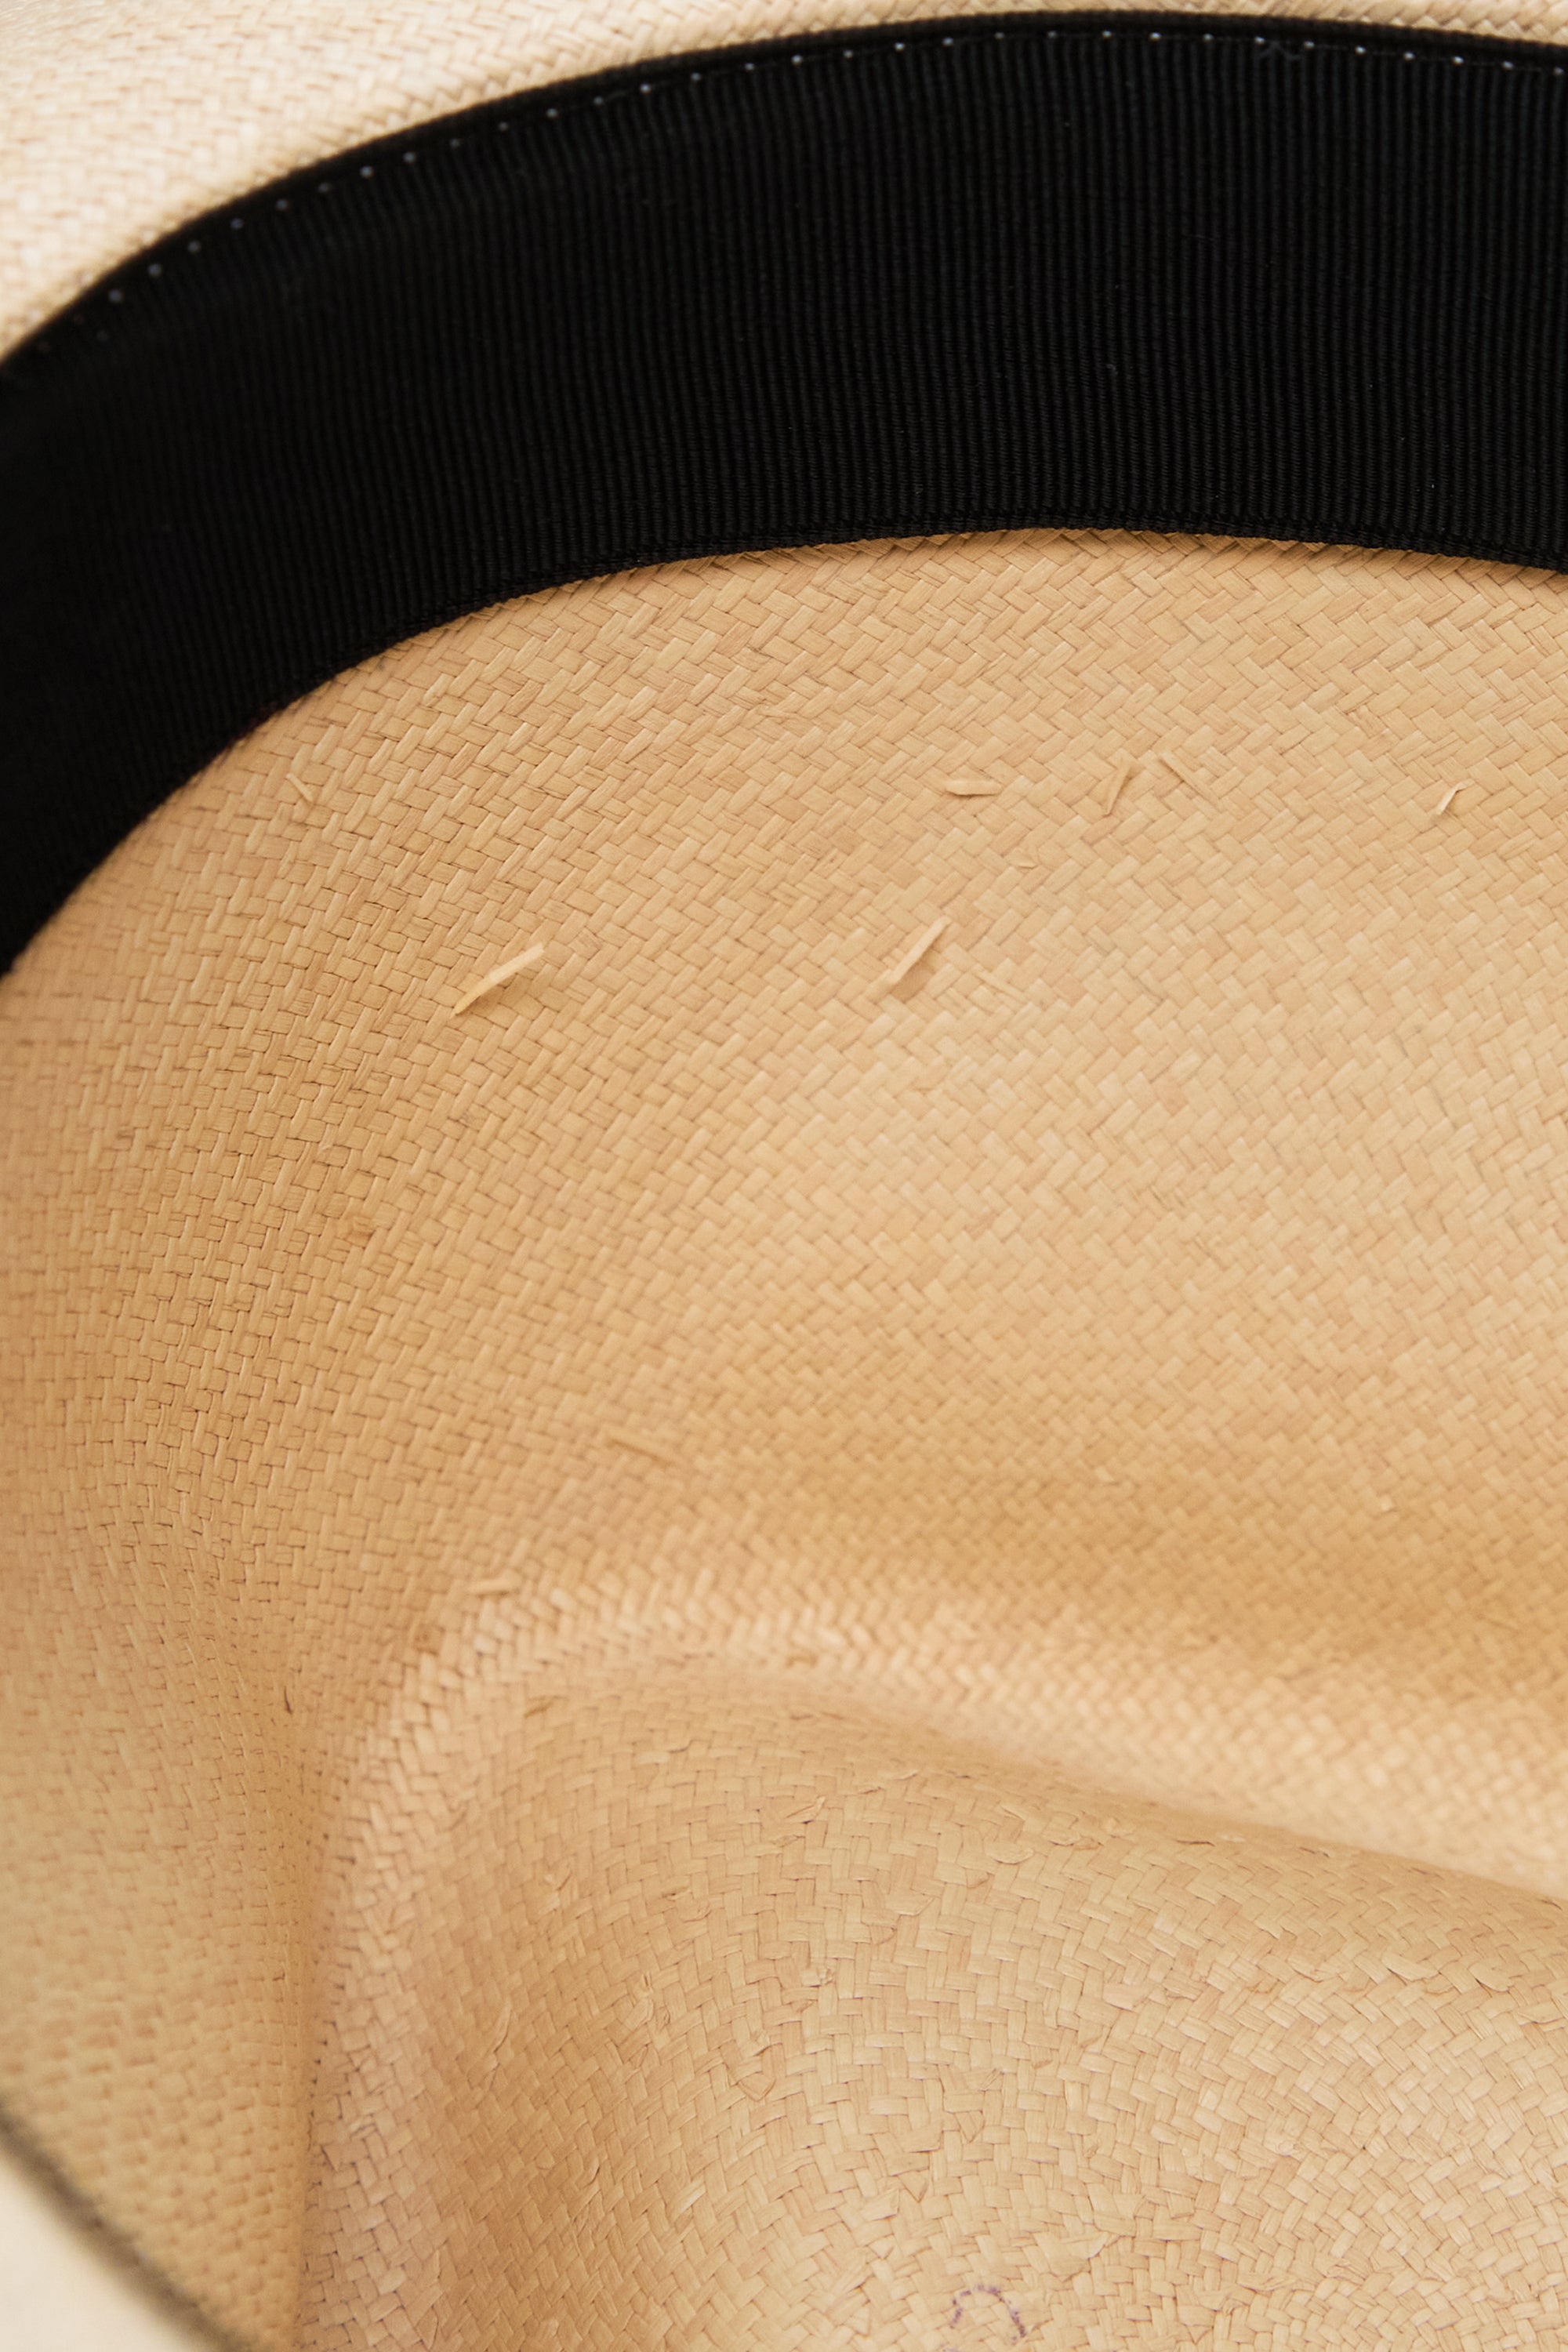 The Armoury Montecristi Panama Hat Old Hood *new with defect*